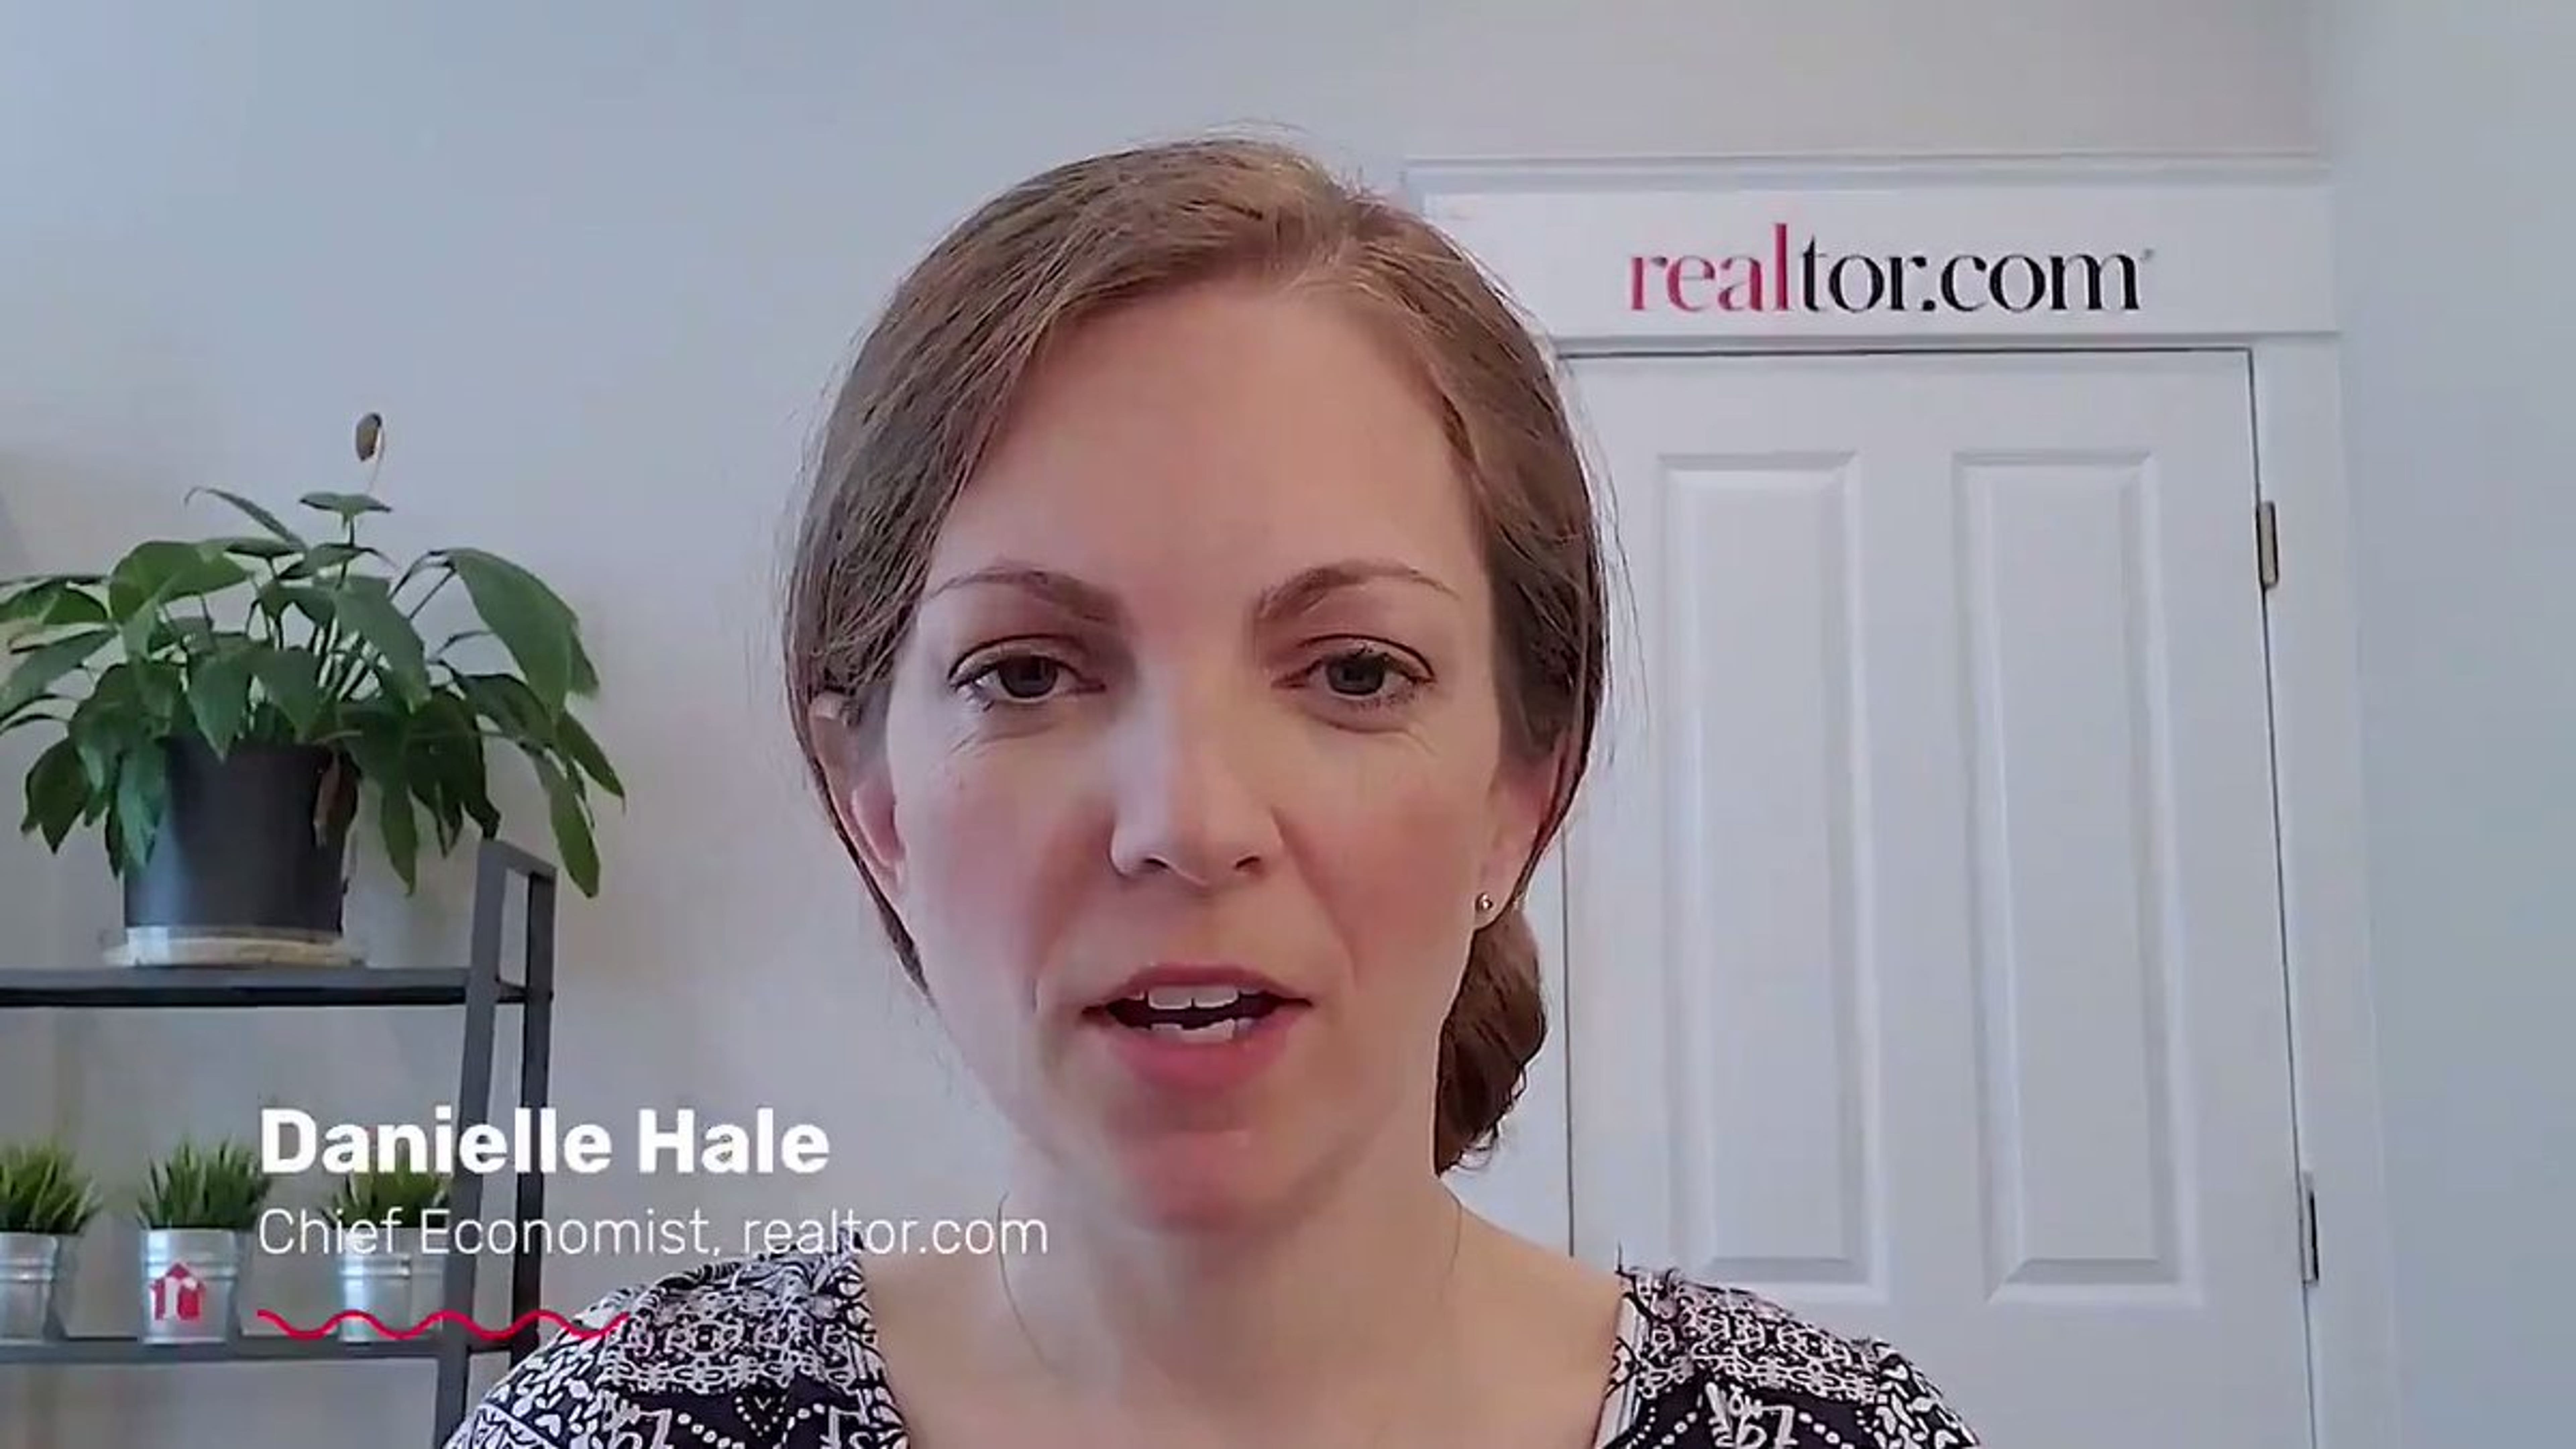 EXCLUSIVE: Housing Economist Danielle Hale On The Supply-Demand Imbalance Facing Homebuyers